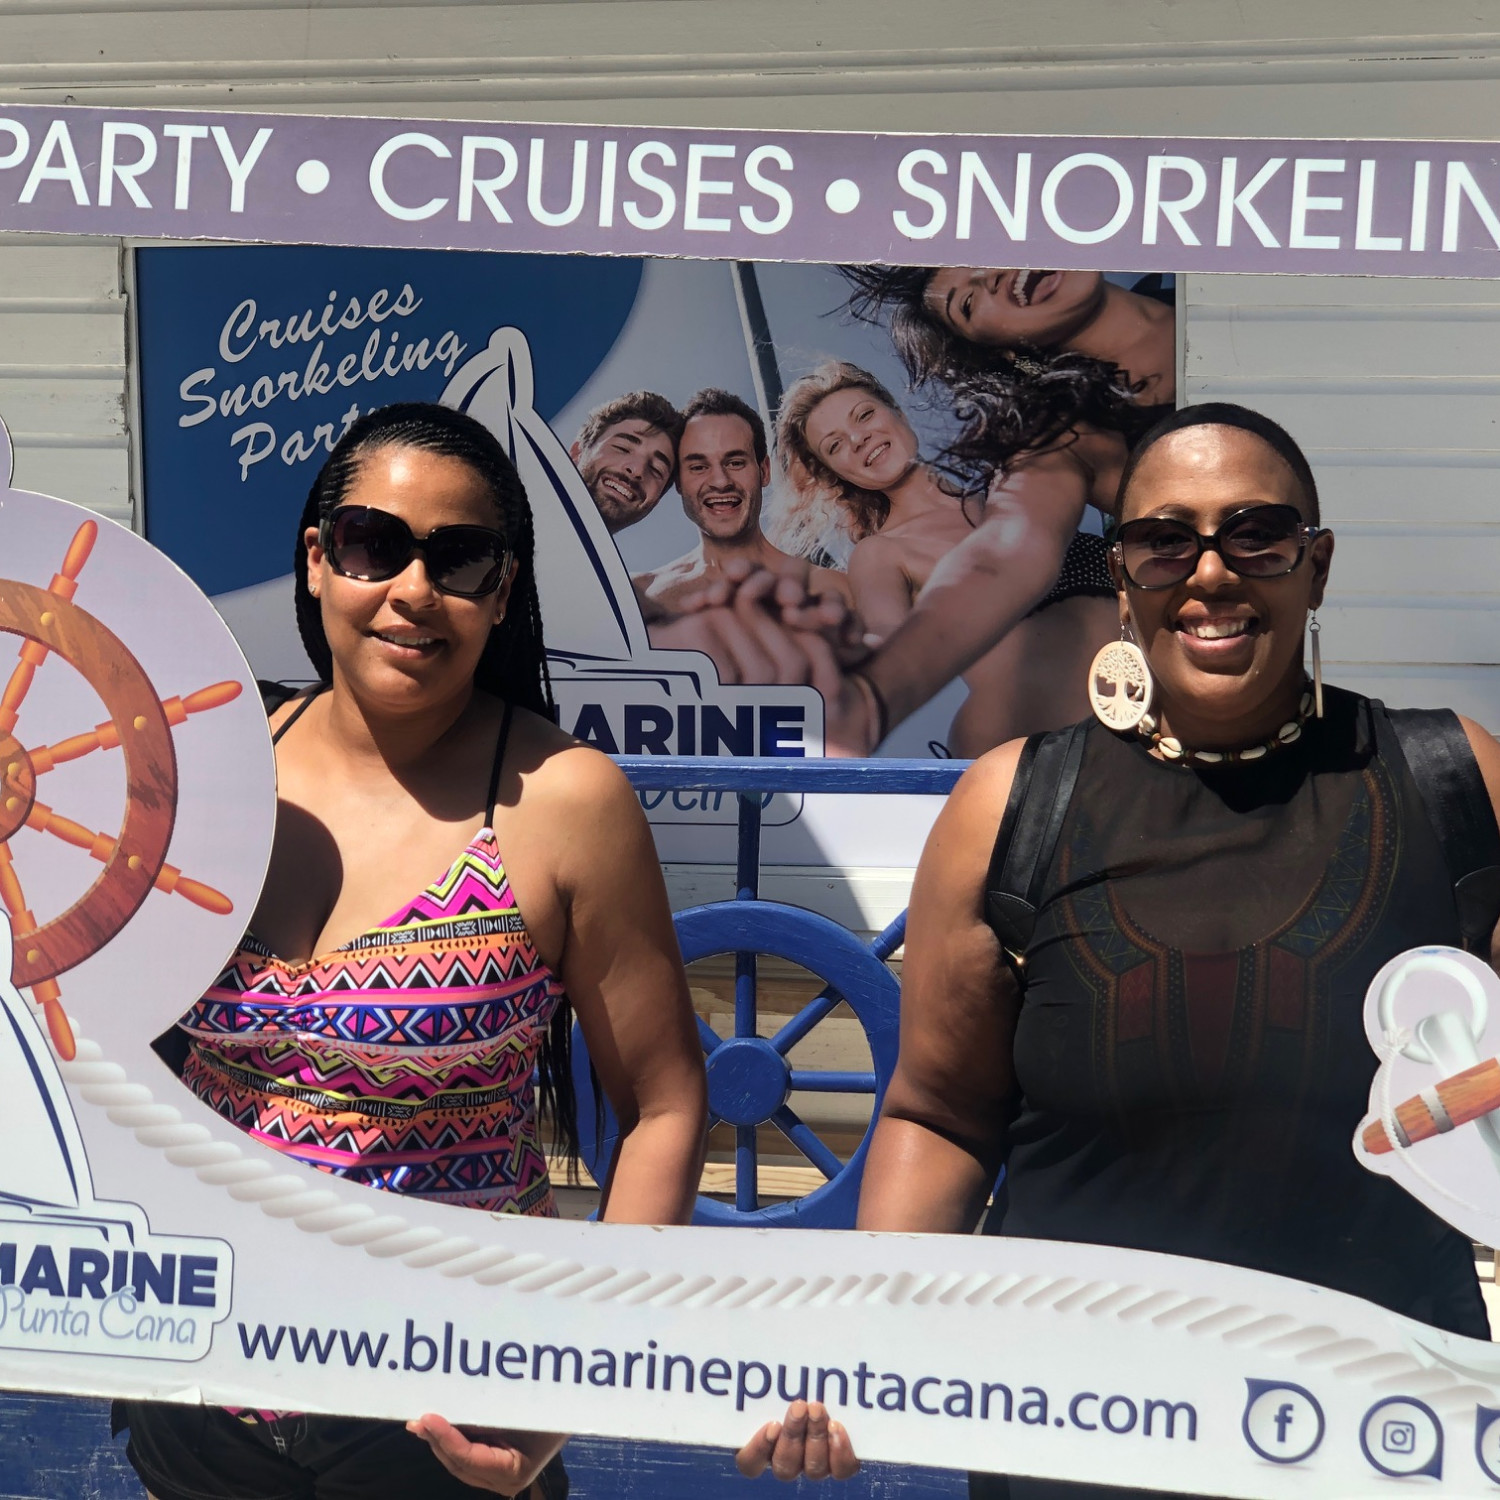 two women holding up a sign reading "party, cruises, snorkeling"